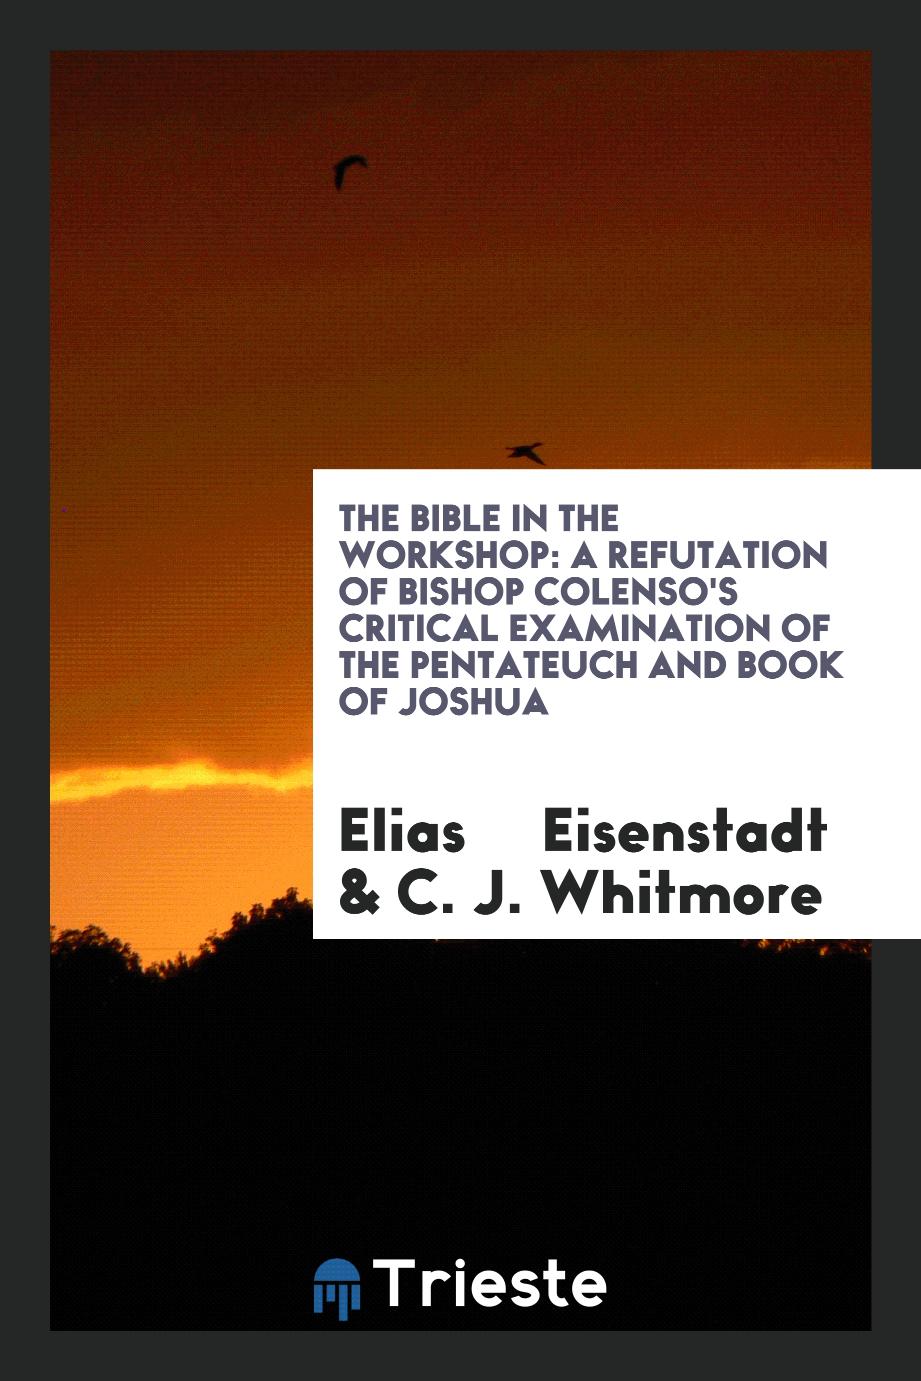 The Bible in the workshop: a refutation of Bishop Colenso's critical examination of the Pentateuch and book of Joshua